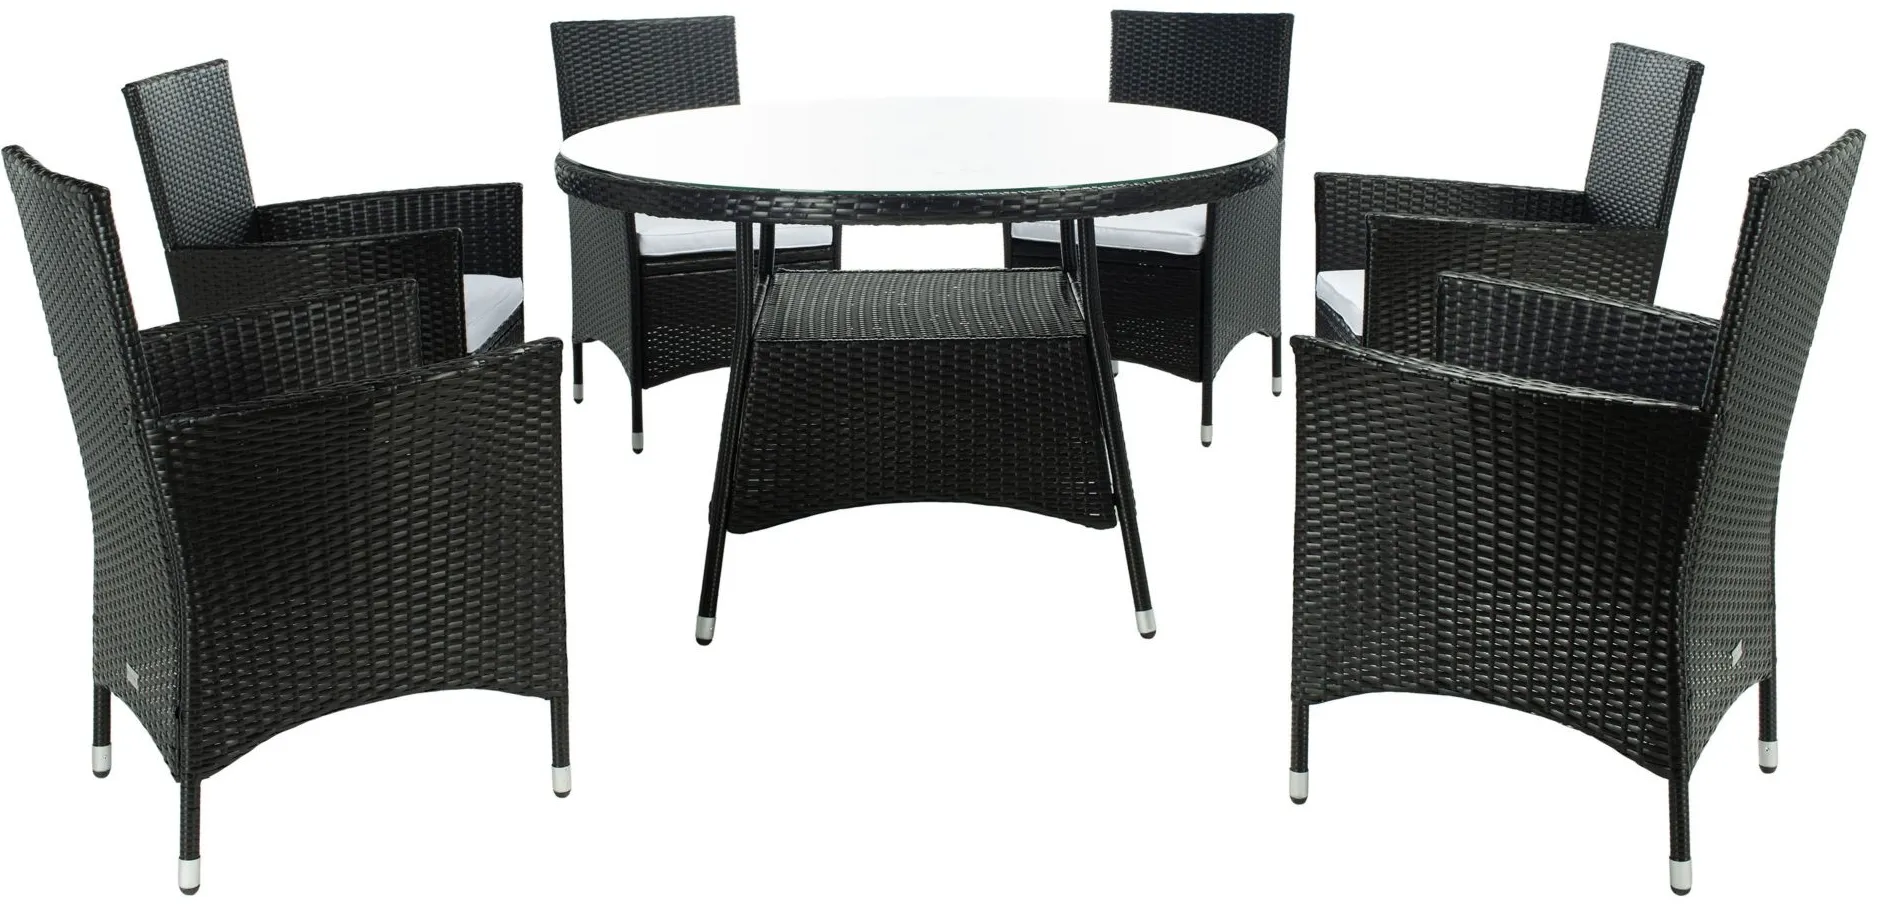 Torus 7-pc. Outdoor Dining Set in Brown With Oatmeal Cushions by Safavieh